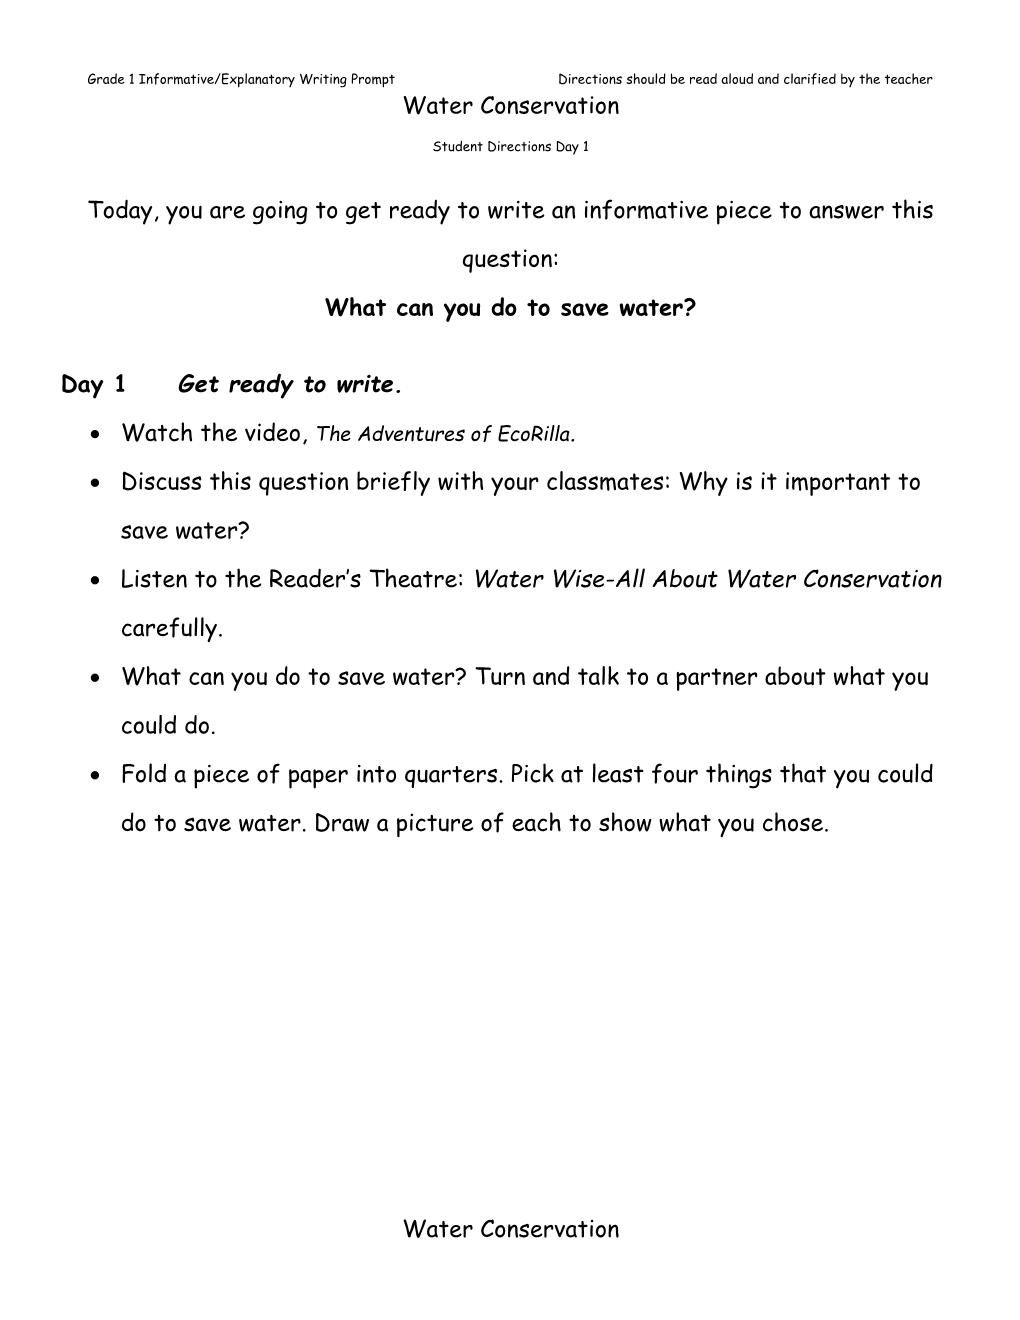 Grade 1 Informative/Explanatory Writing Prompt Directions Should Be Read Aloud and Clarified